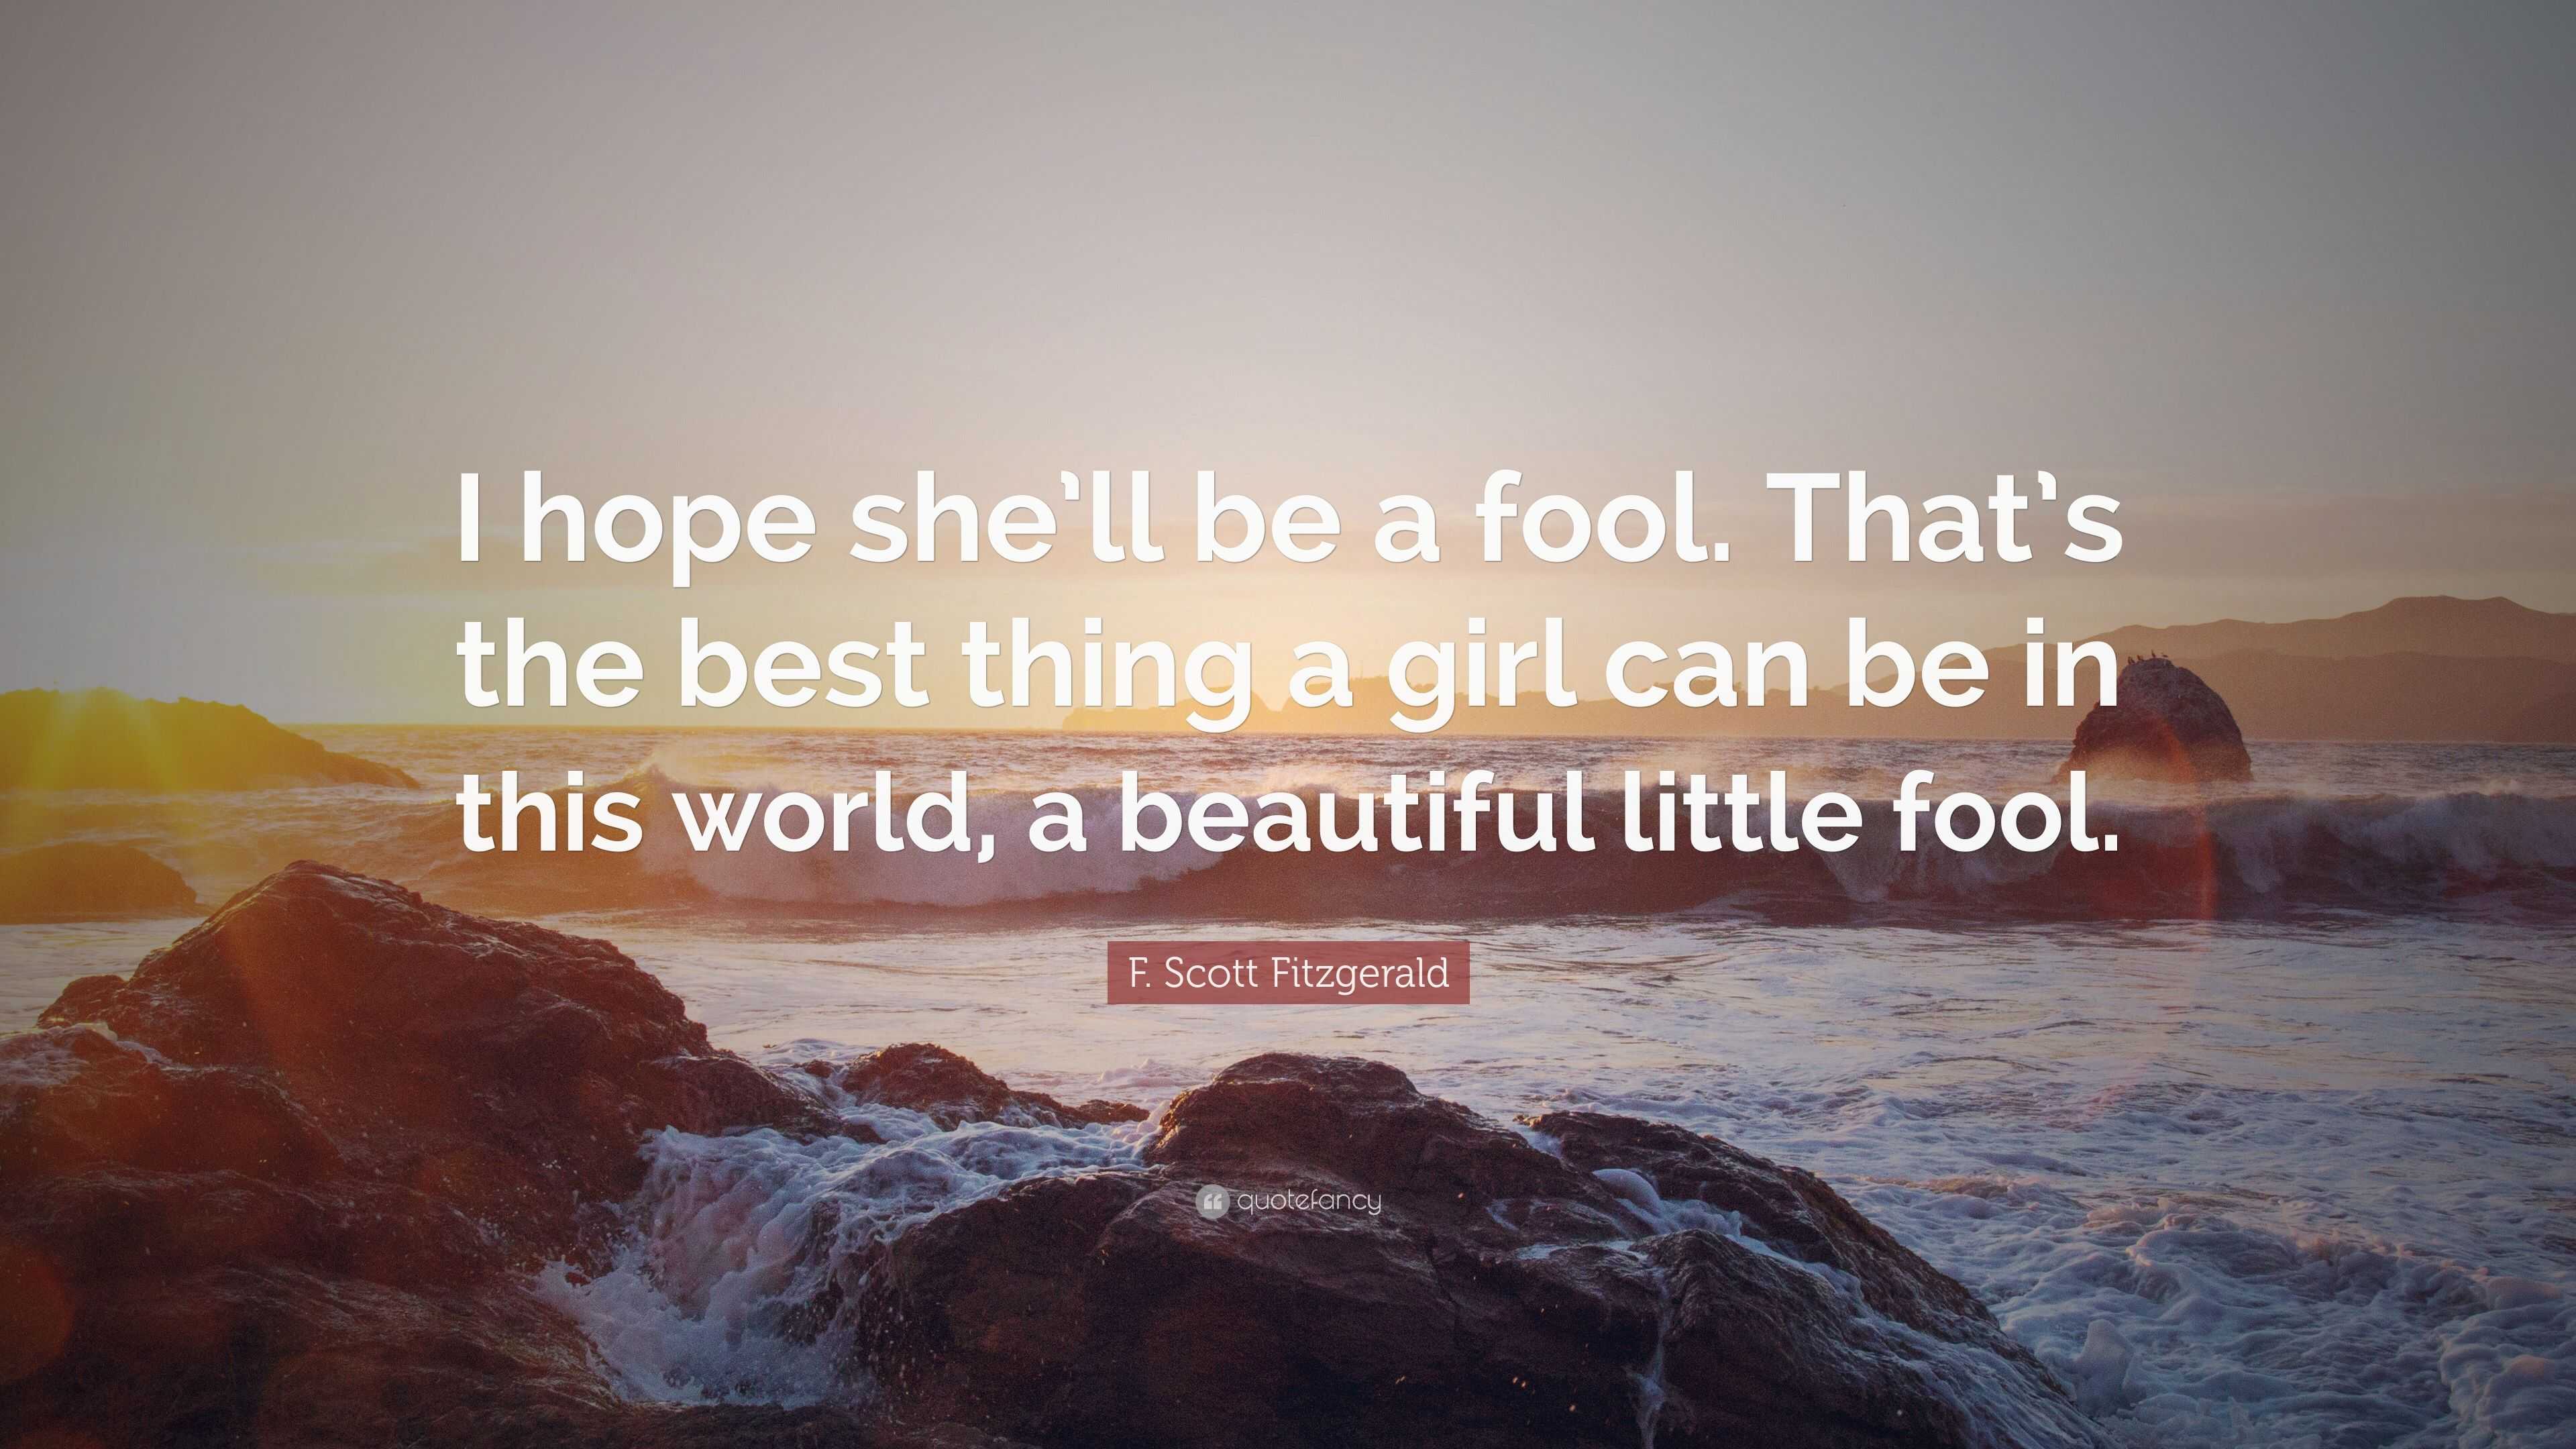 F Scott Fitzgerald Quote I Hope She Ll Be A Fool That S The Best Thing A